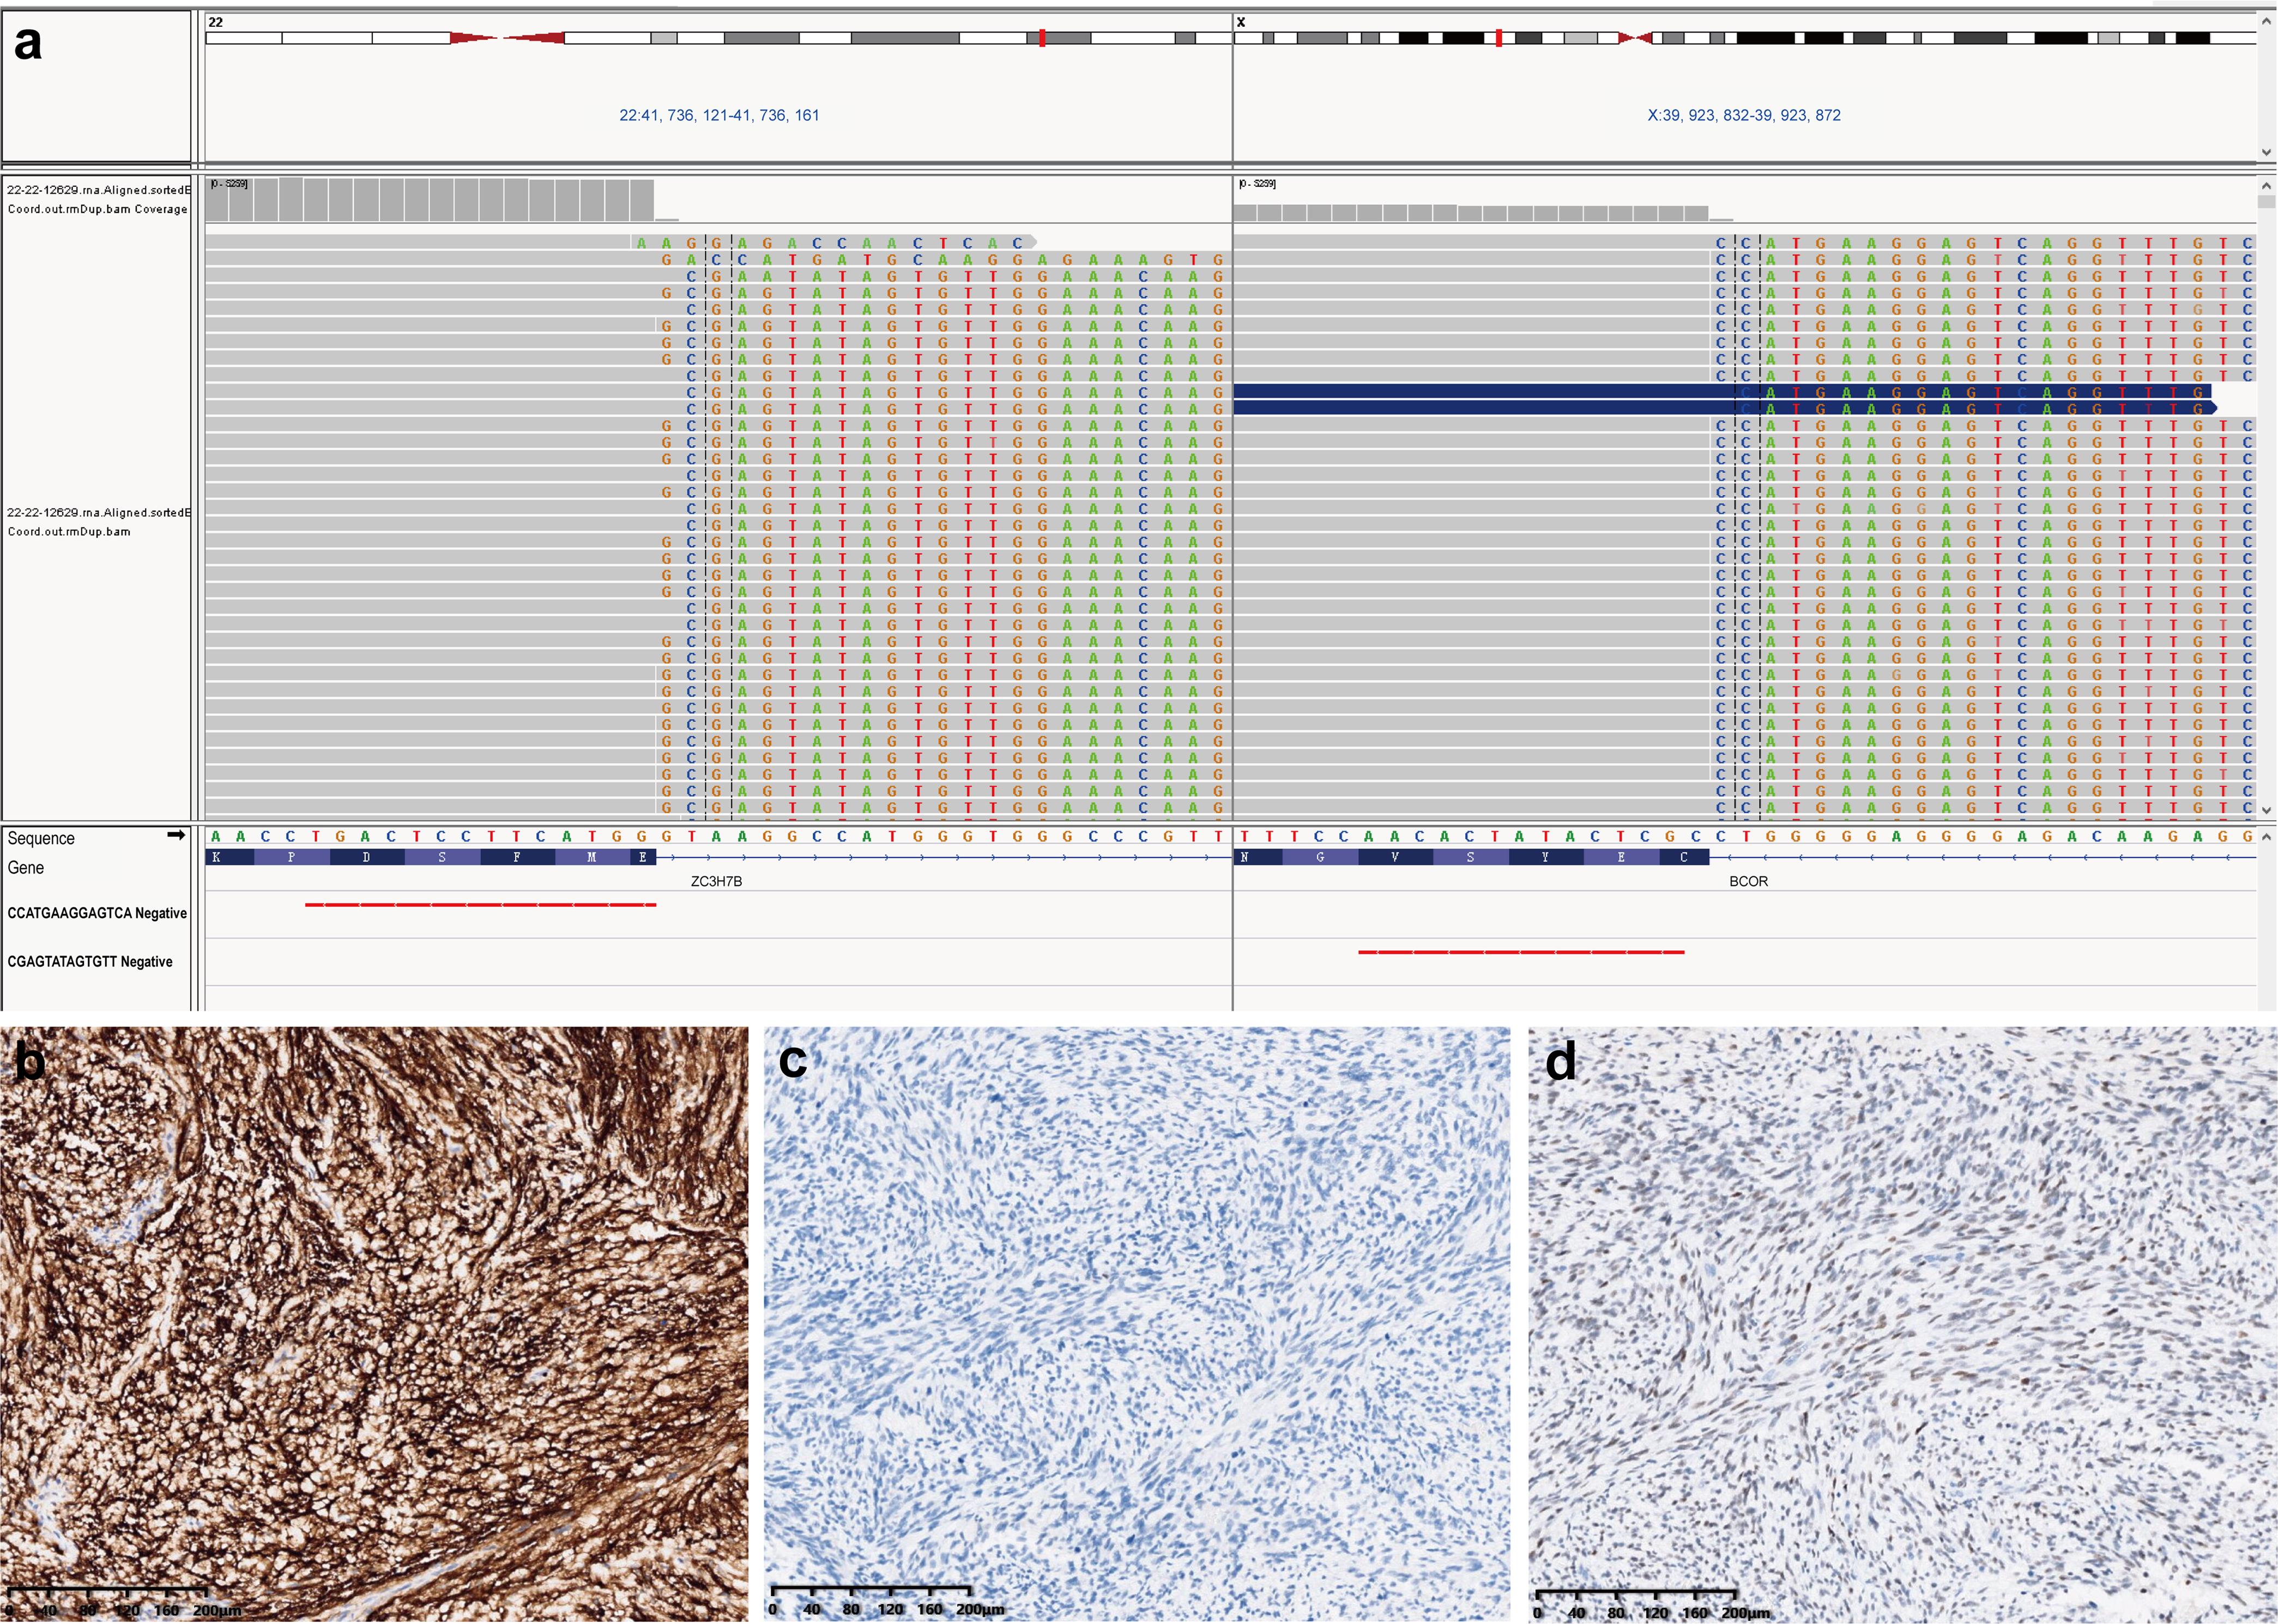 RNA sequencing results and additional immunostaining findings.